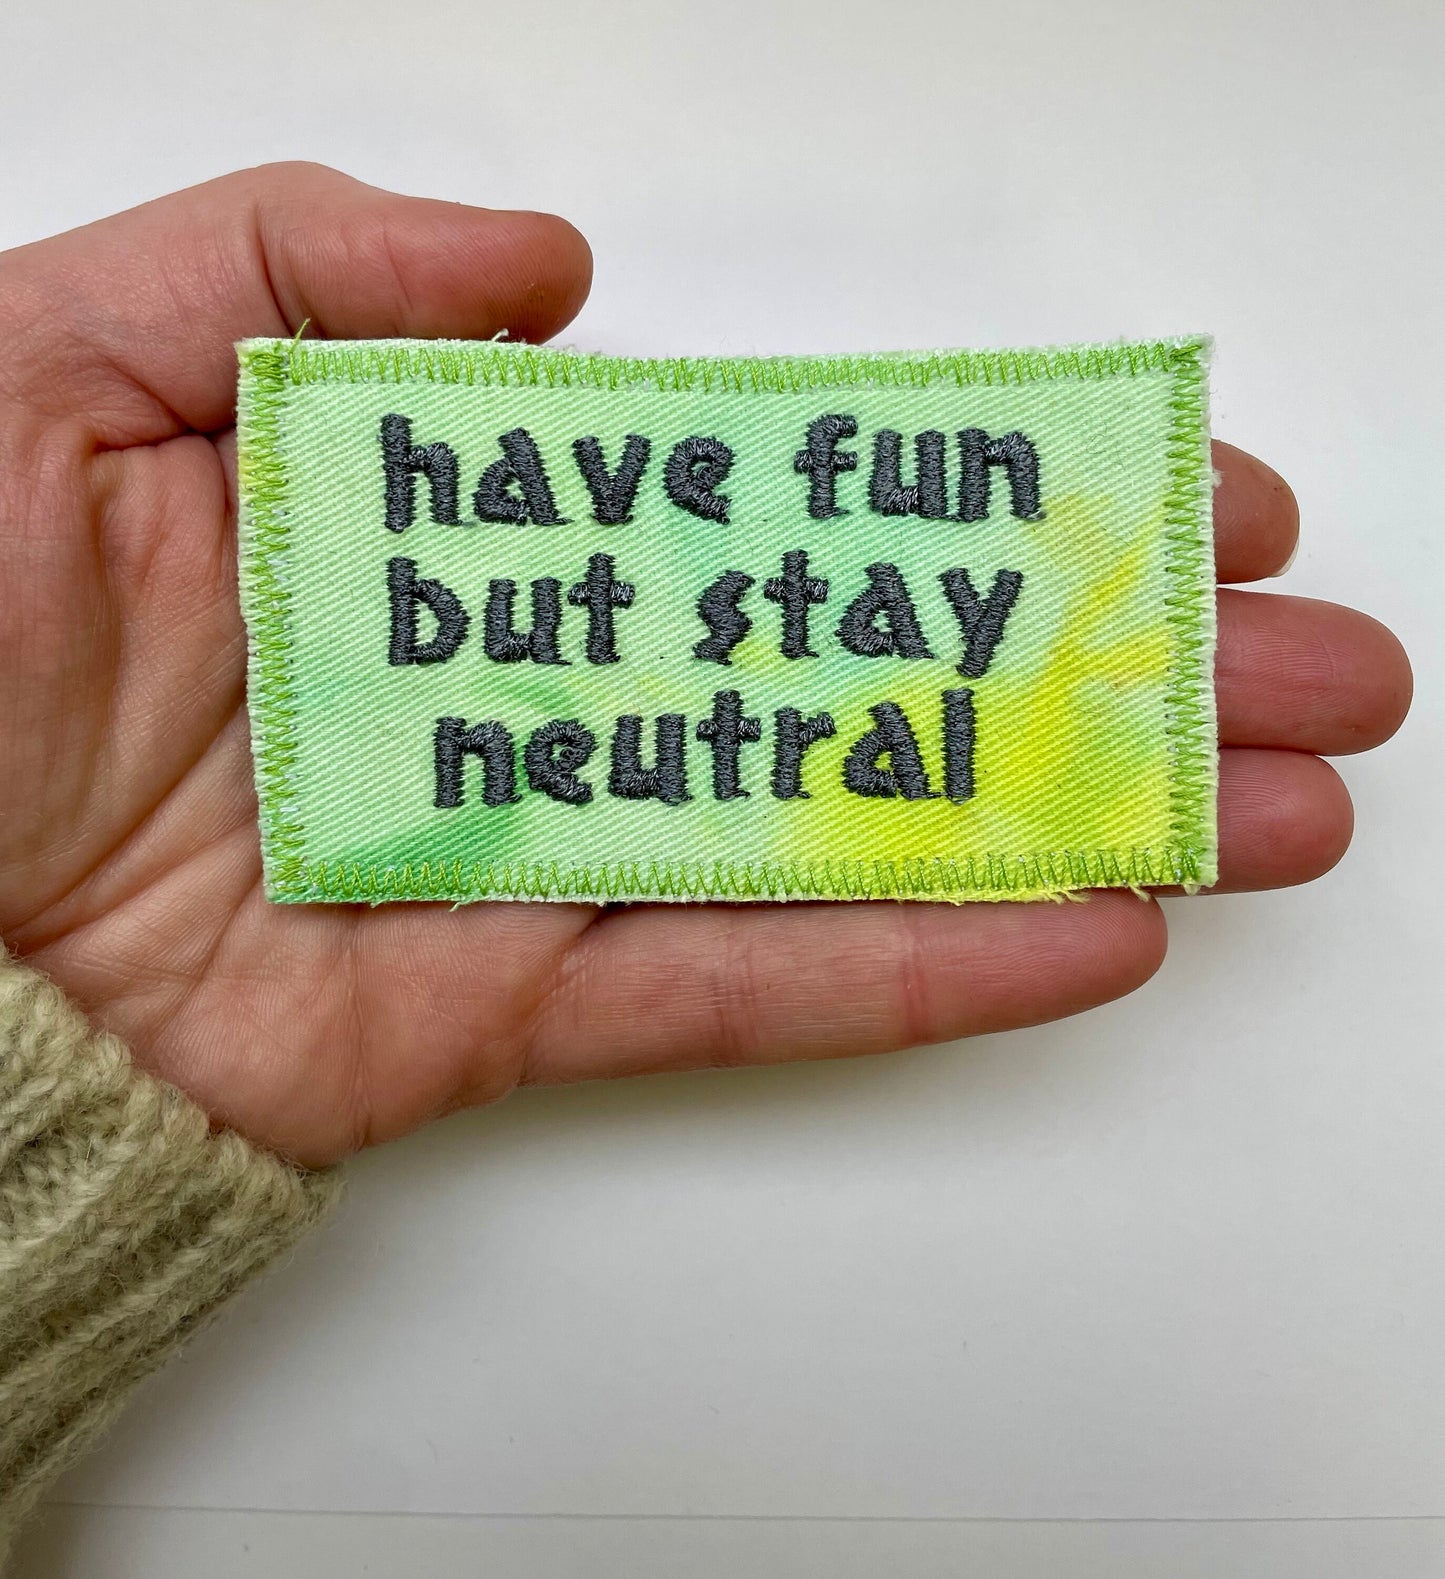 a hand holding a piece of cloth that says have fun but stay neutral